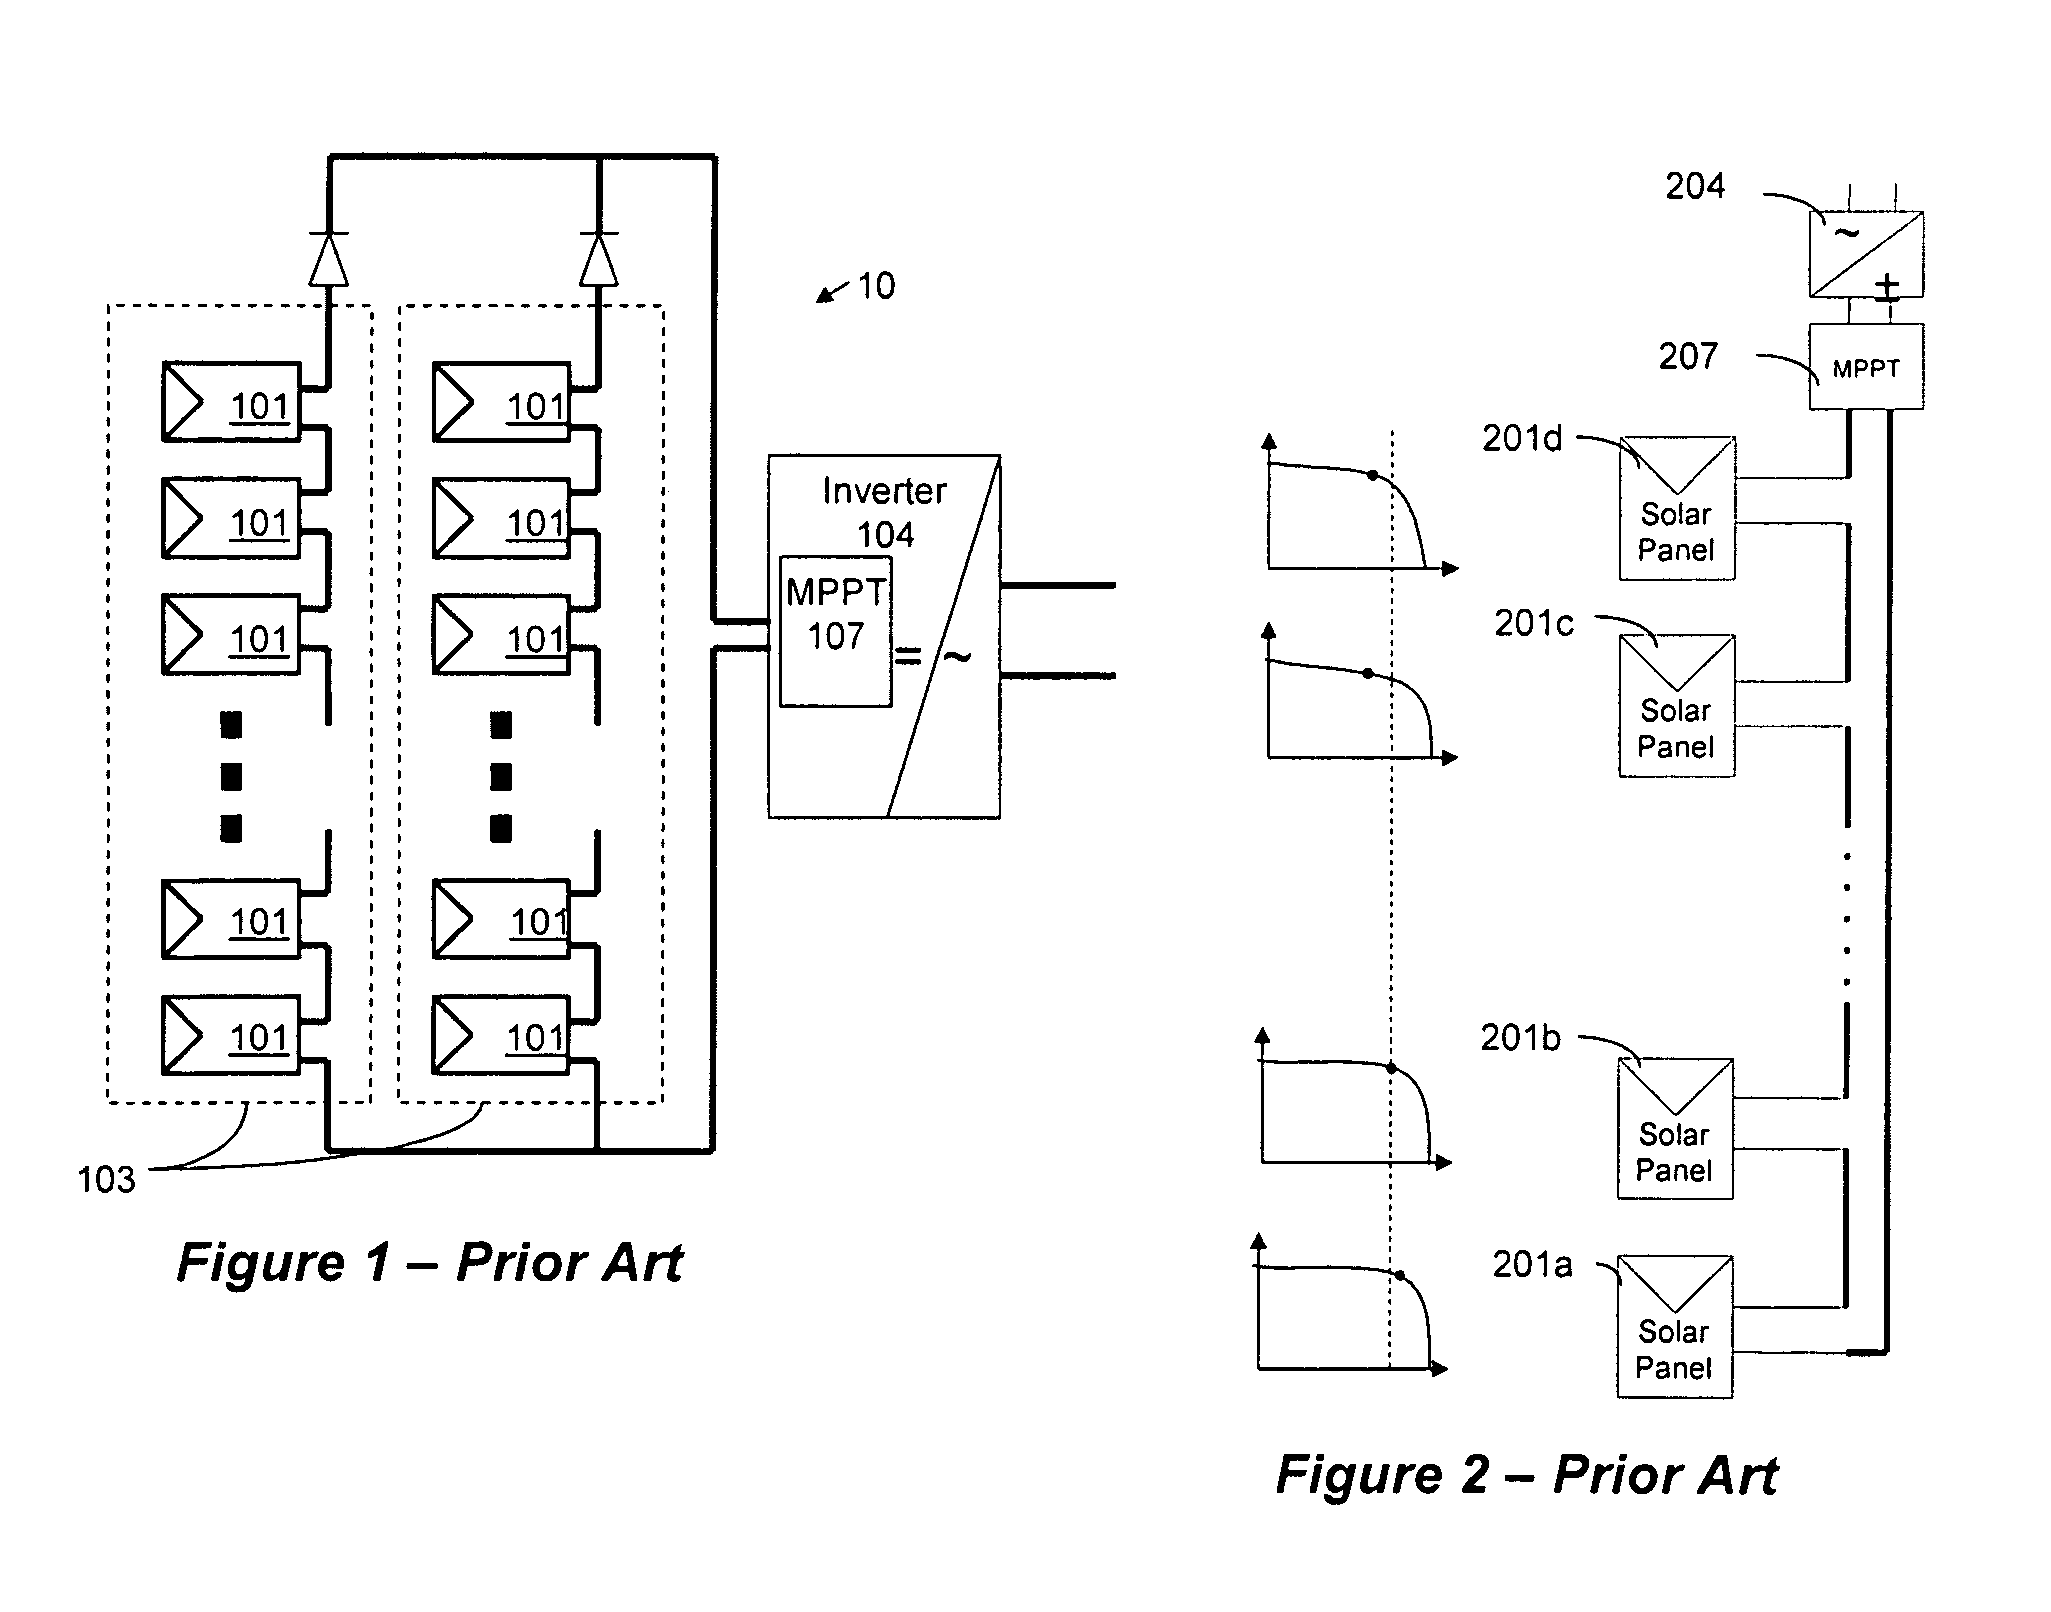 Method for distributed power harvesting using DC power sources